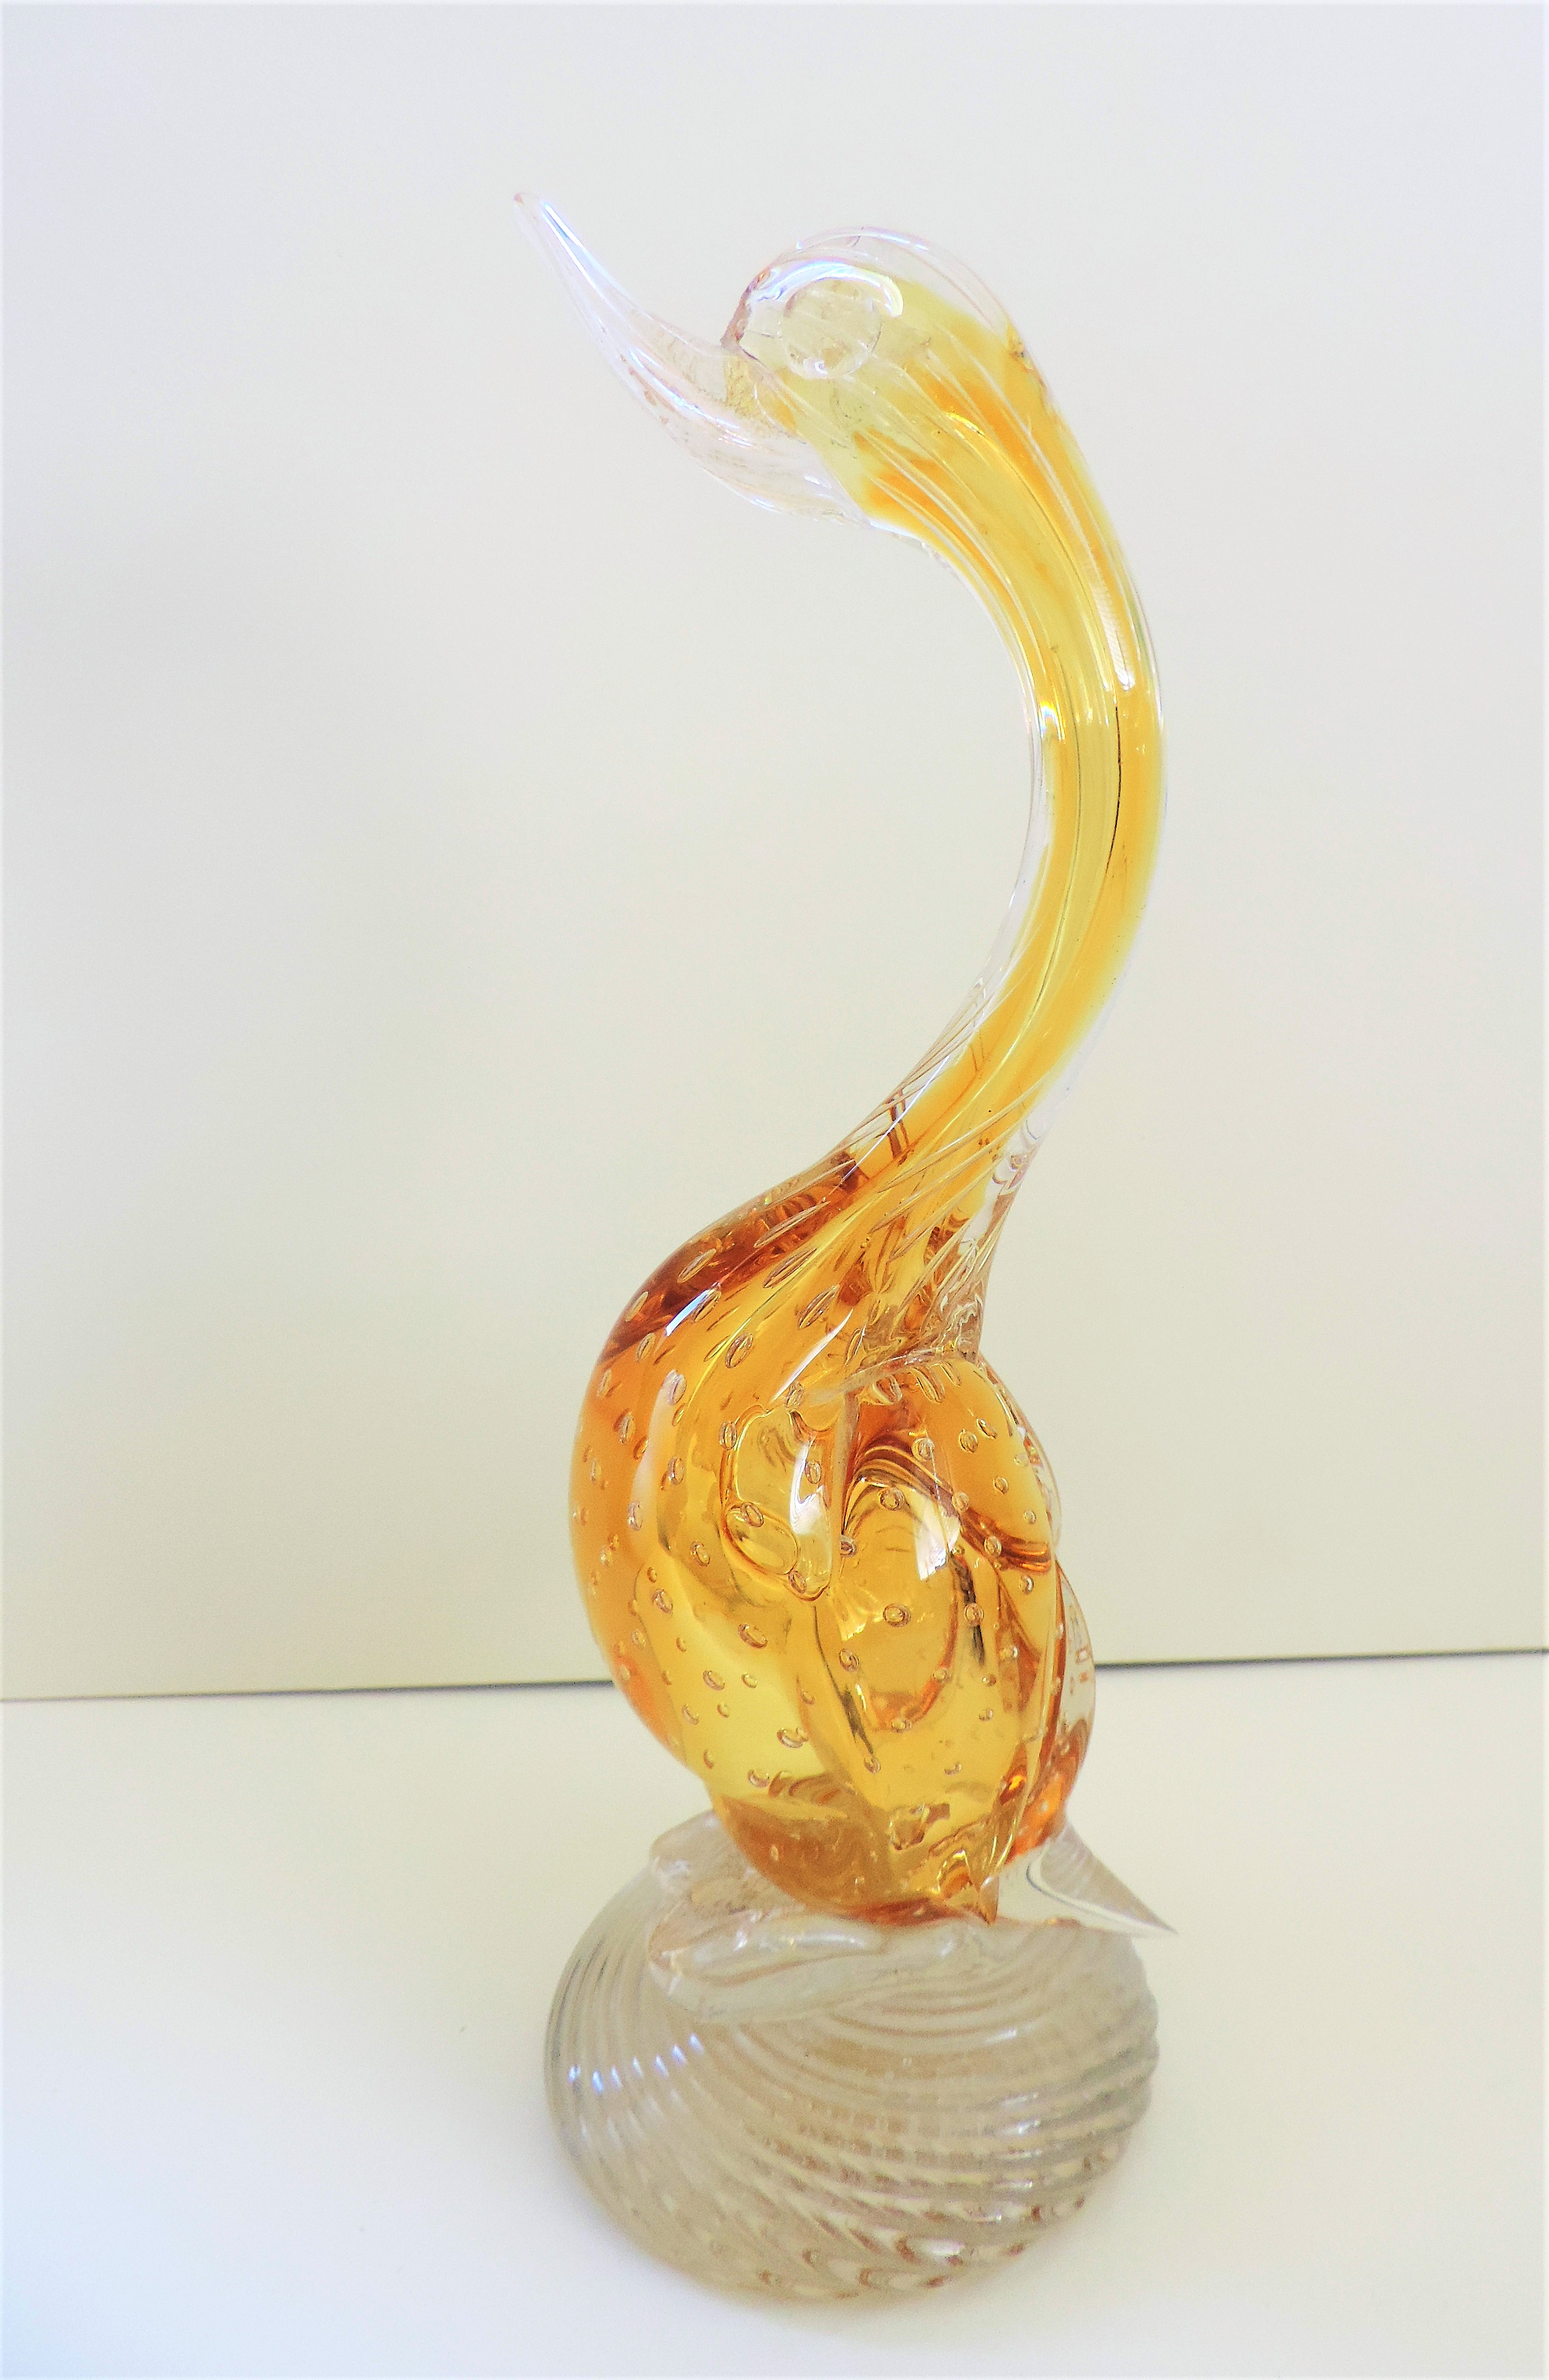 Murano Art Glass Sculpture Amber Bubble 27cm Tall - Image 3 of 4